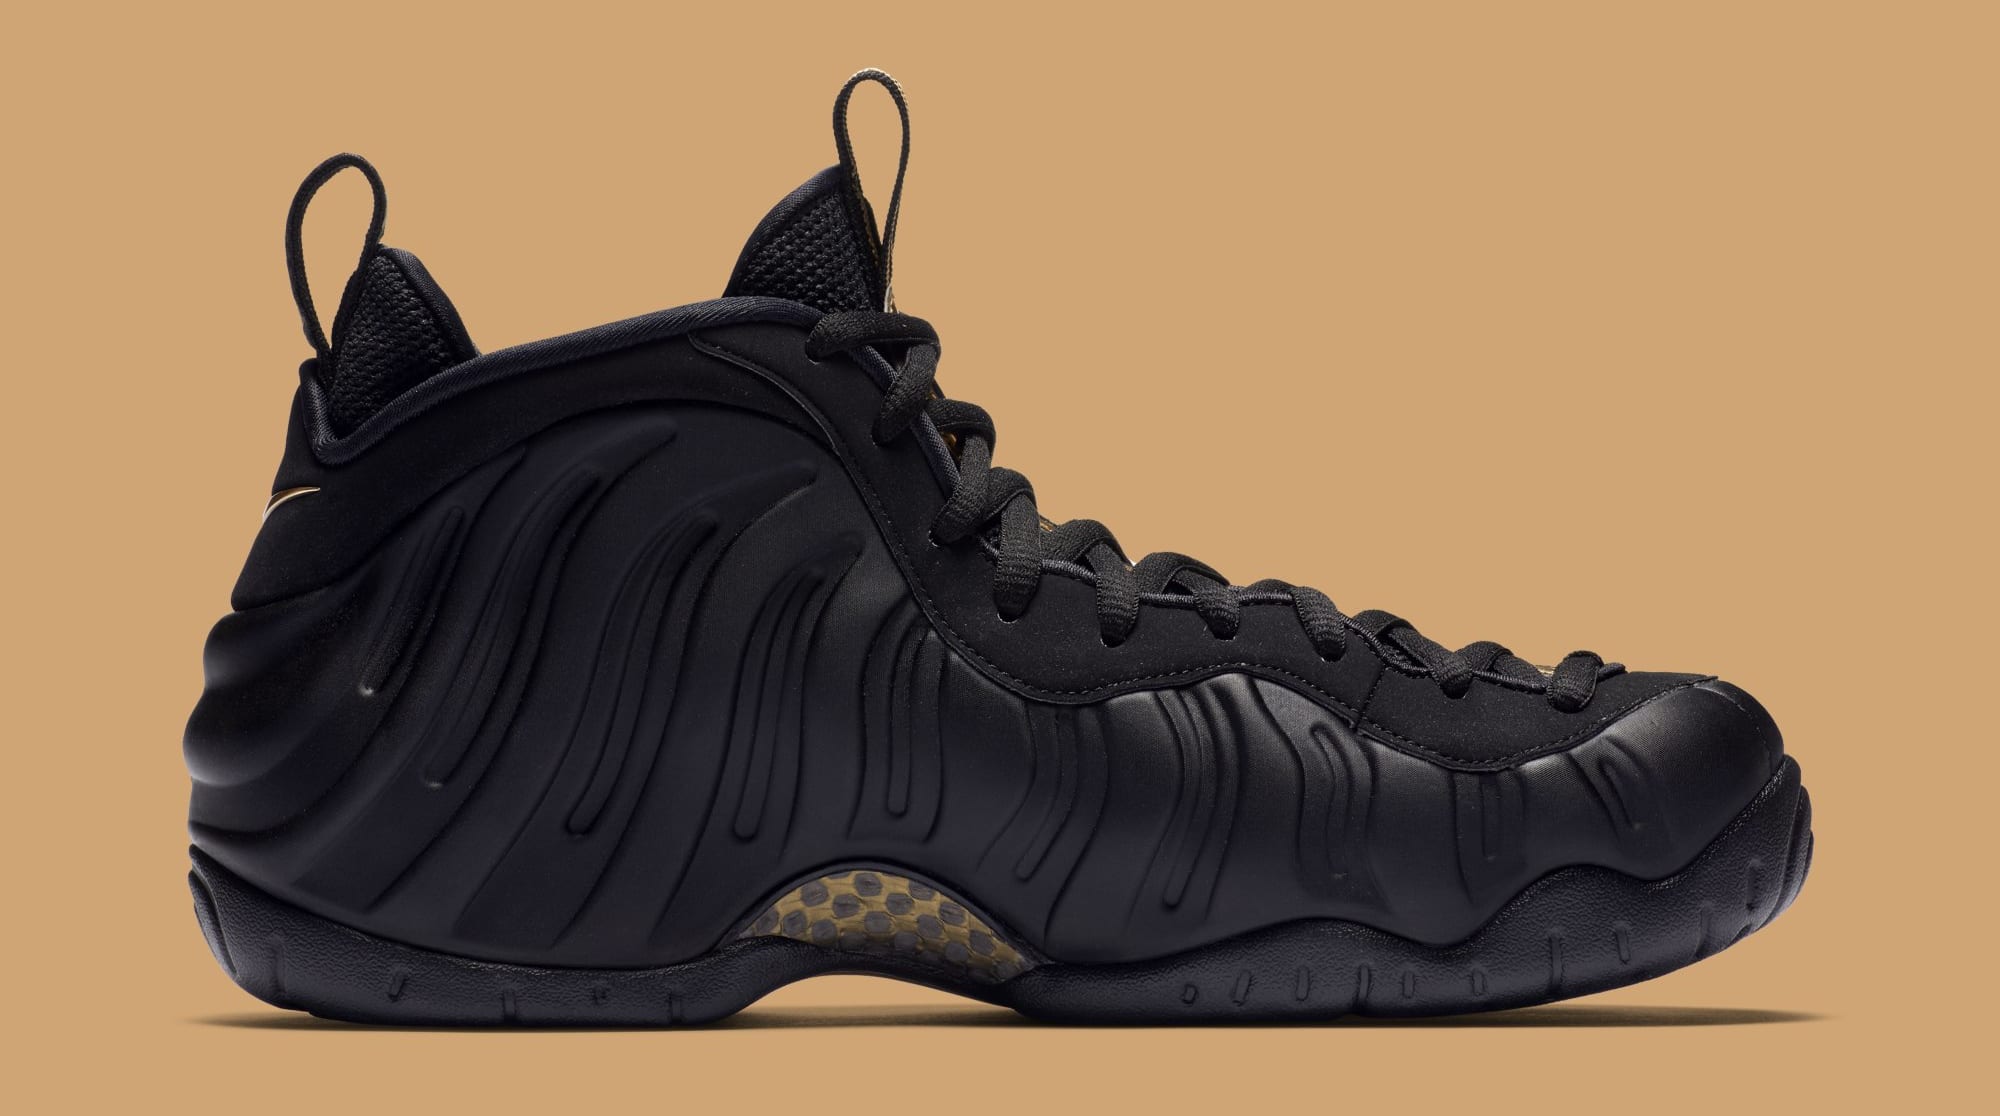 the new black and gold foamposites